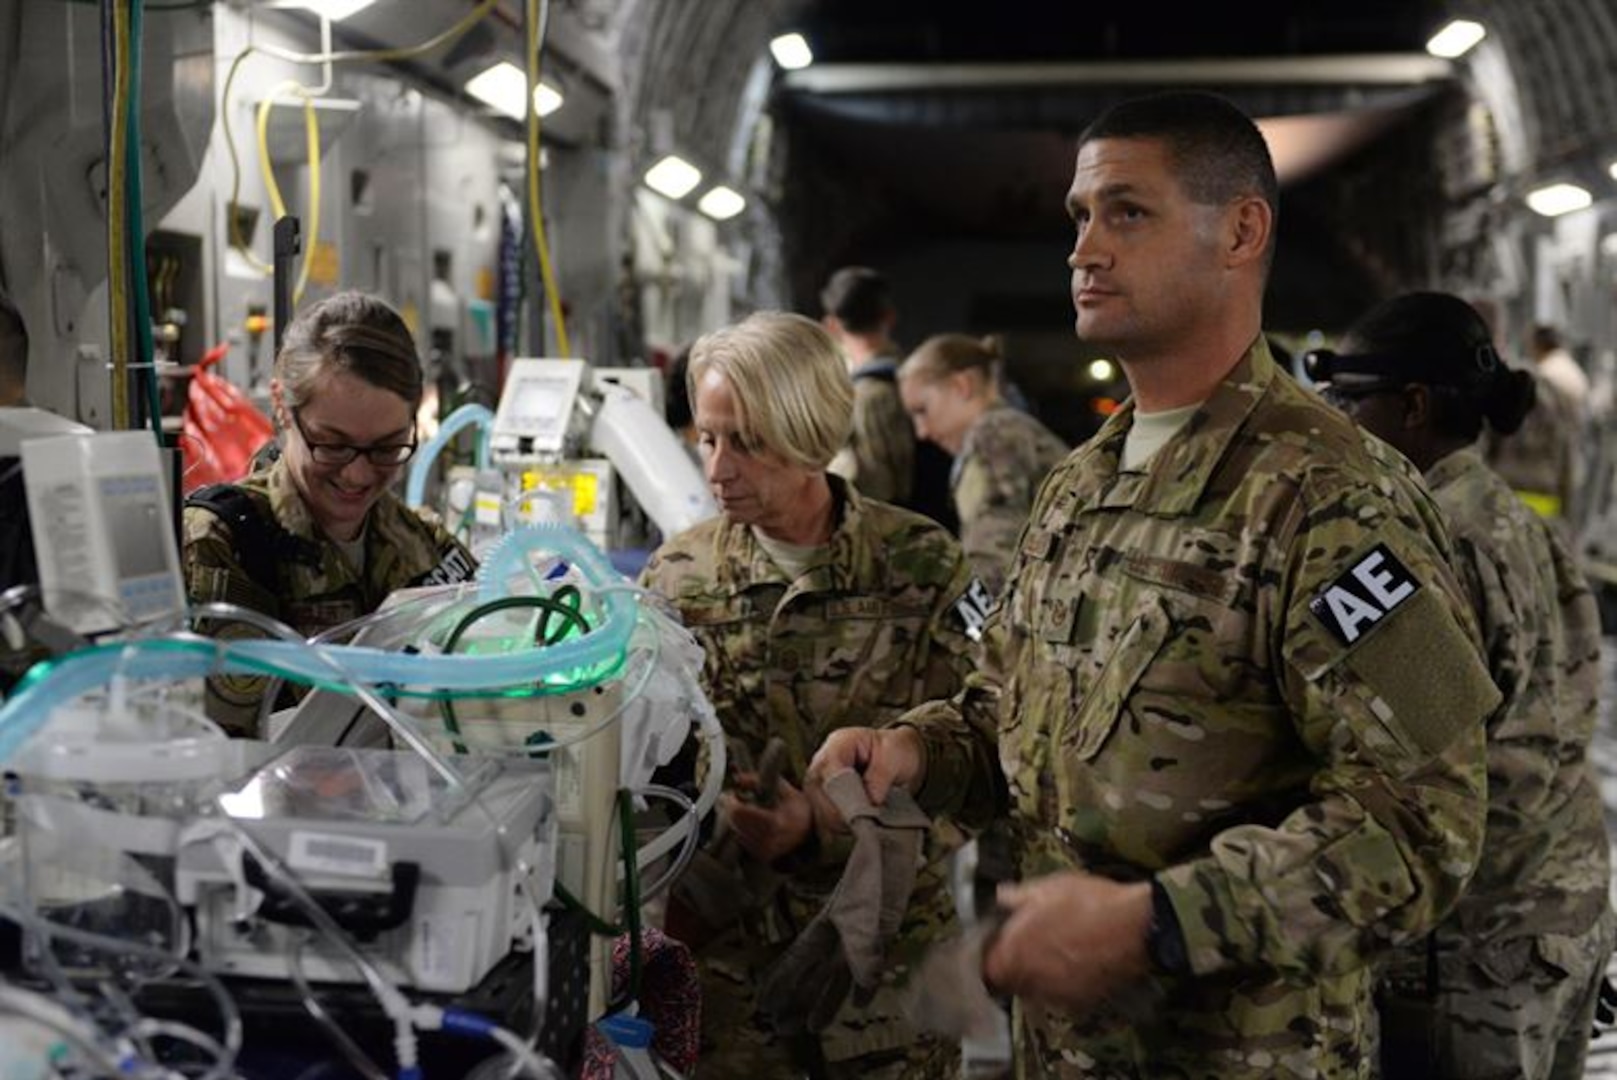 North Carolina Air National Guard Tech. Sgt. Russell McLamb, an aeromedical evacuation technician, helps load an injured service member onto a C-17 Globemaster III on the flight line at Bagram Airfield, Afghanistan, Aug. 8, 2015. McLamb, a veteran of three branches of the military, is deployed from the 156th Aeromedical Evacuation Squadron, based in Charlotte, North Carolina, to the 455th Expeditionary Aeromedical Evacuation Squadron at Bagram. 